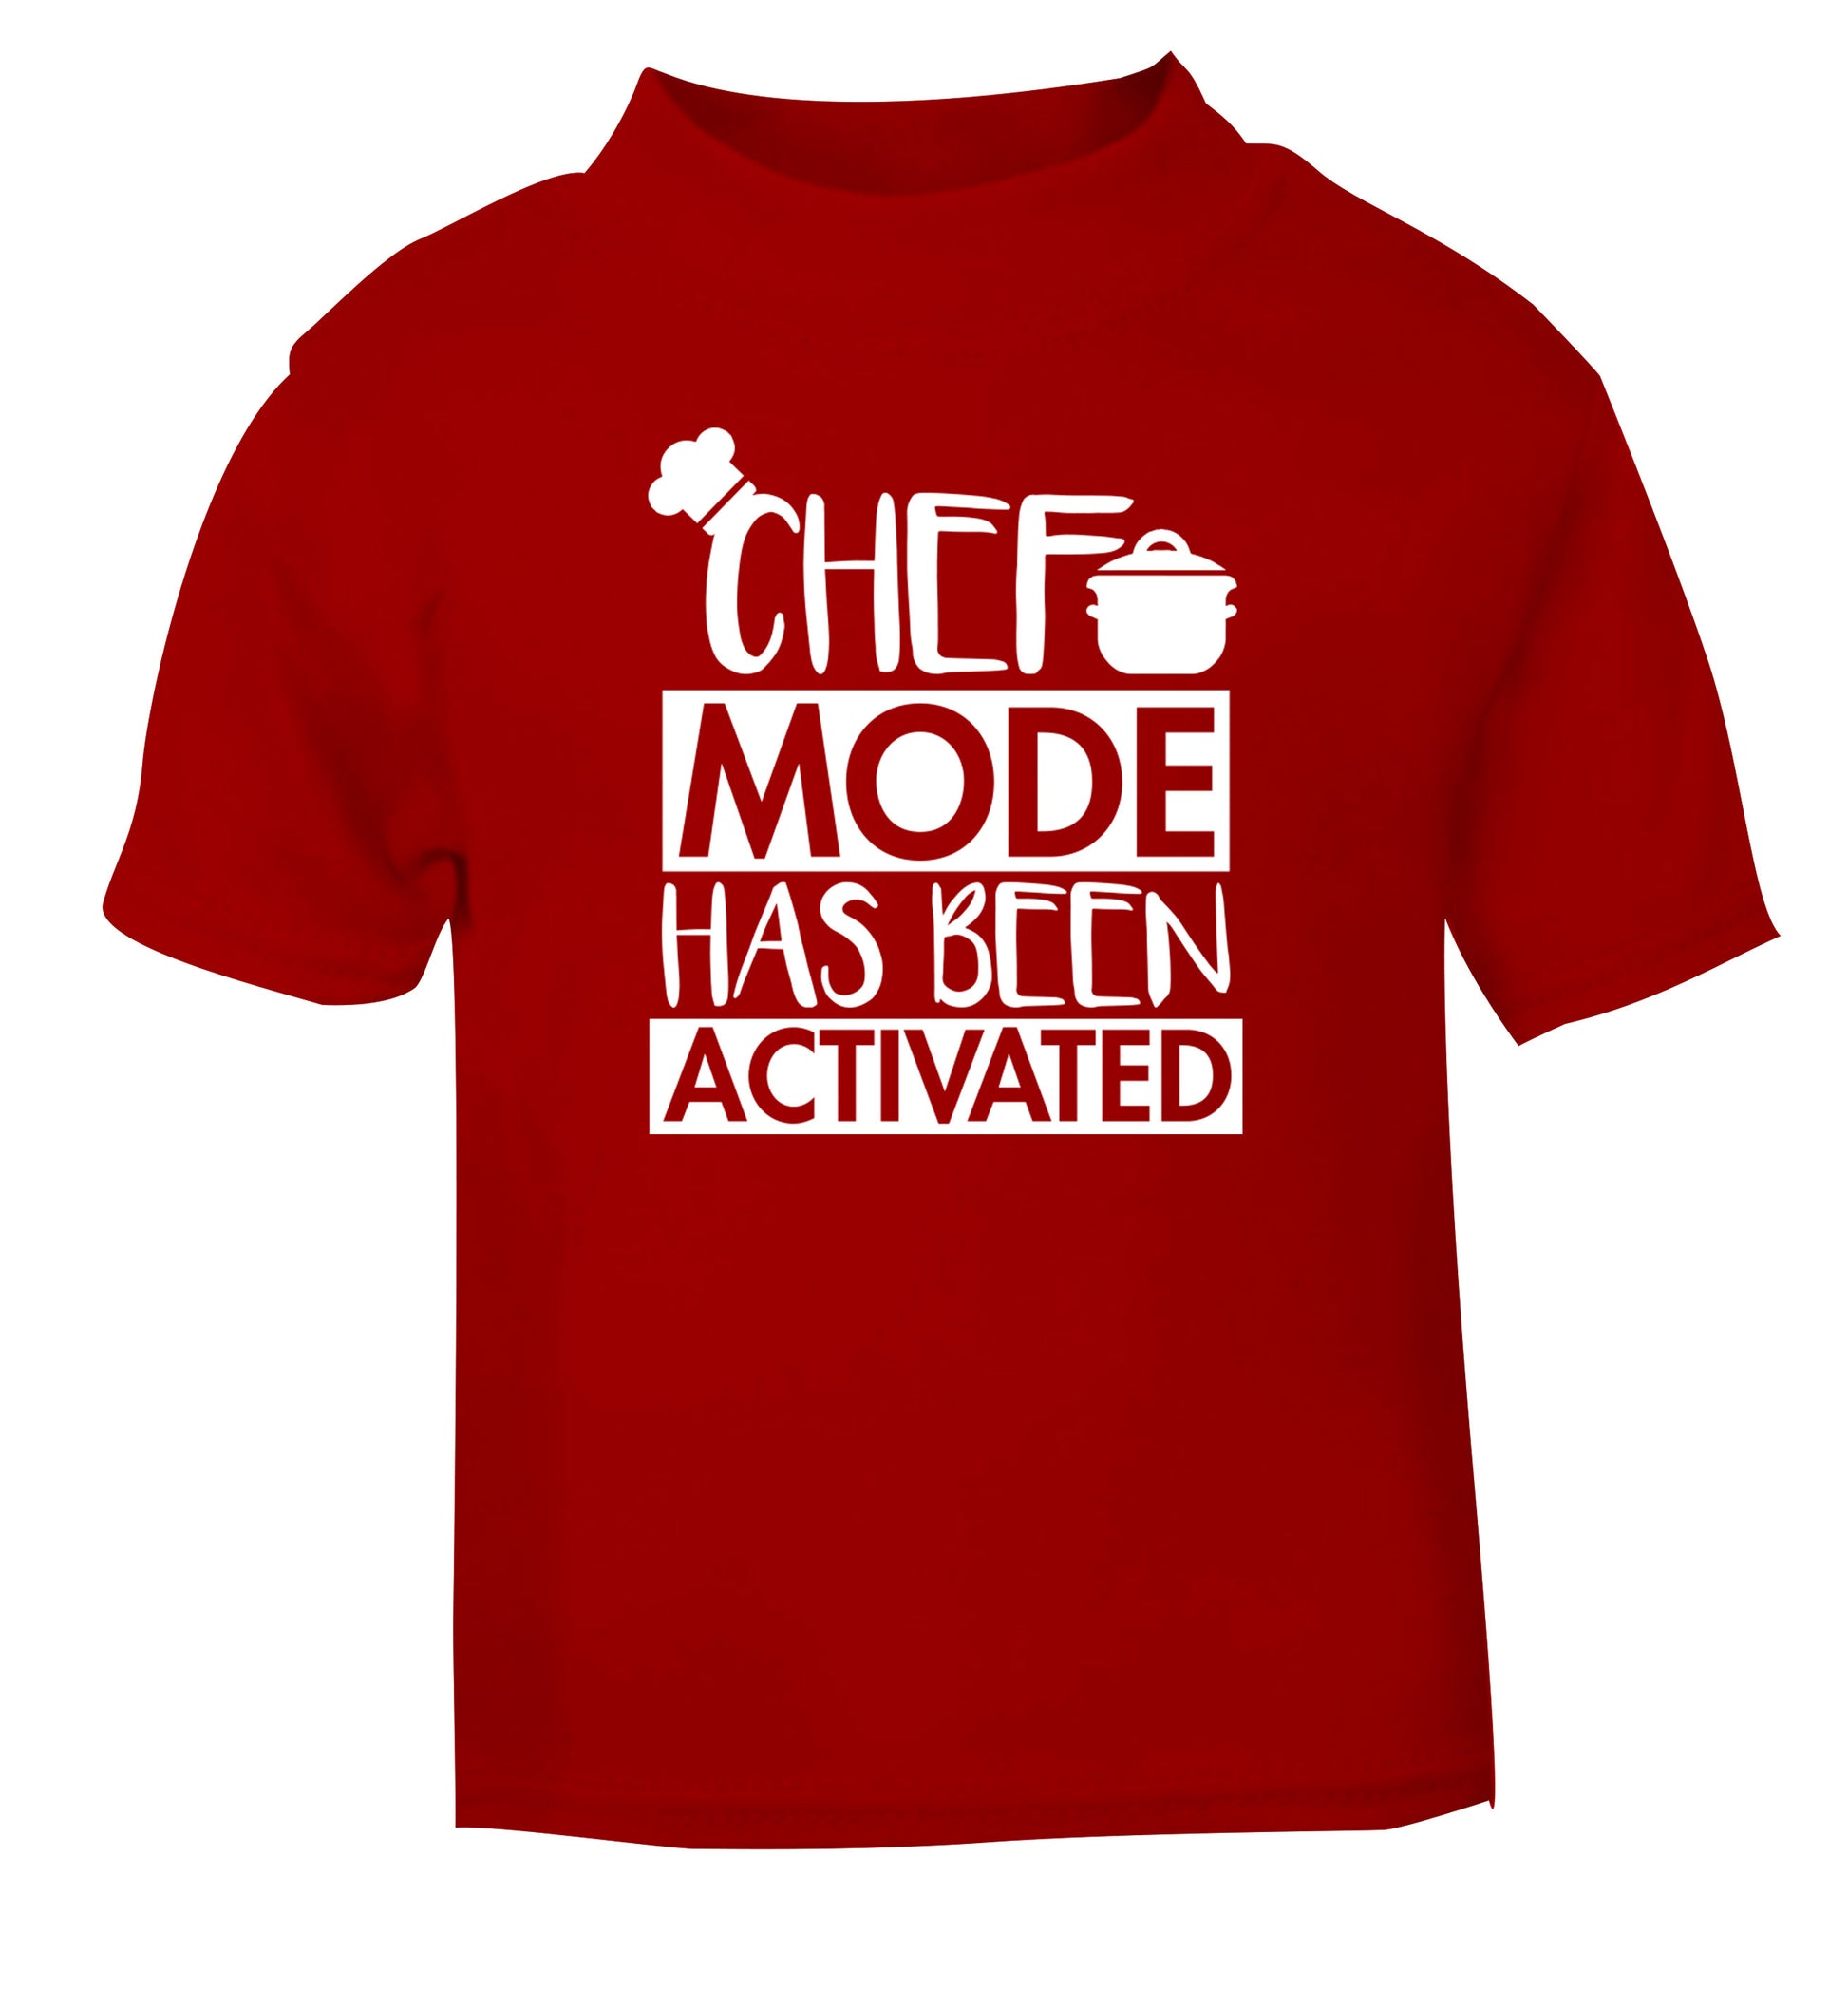 Chef mode has been activated red Baby Toddler Tshirt 2 Years